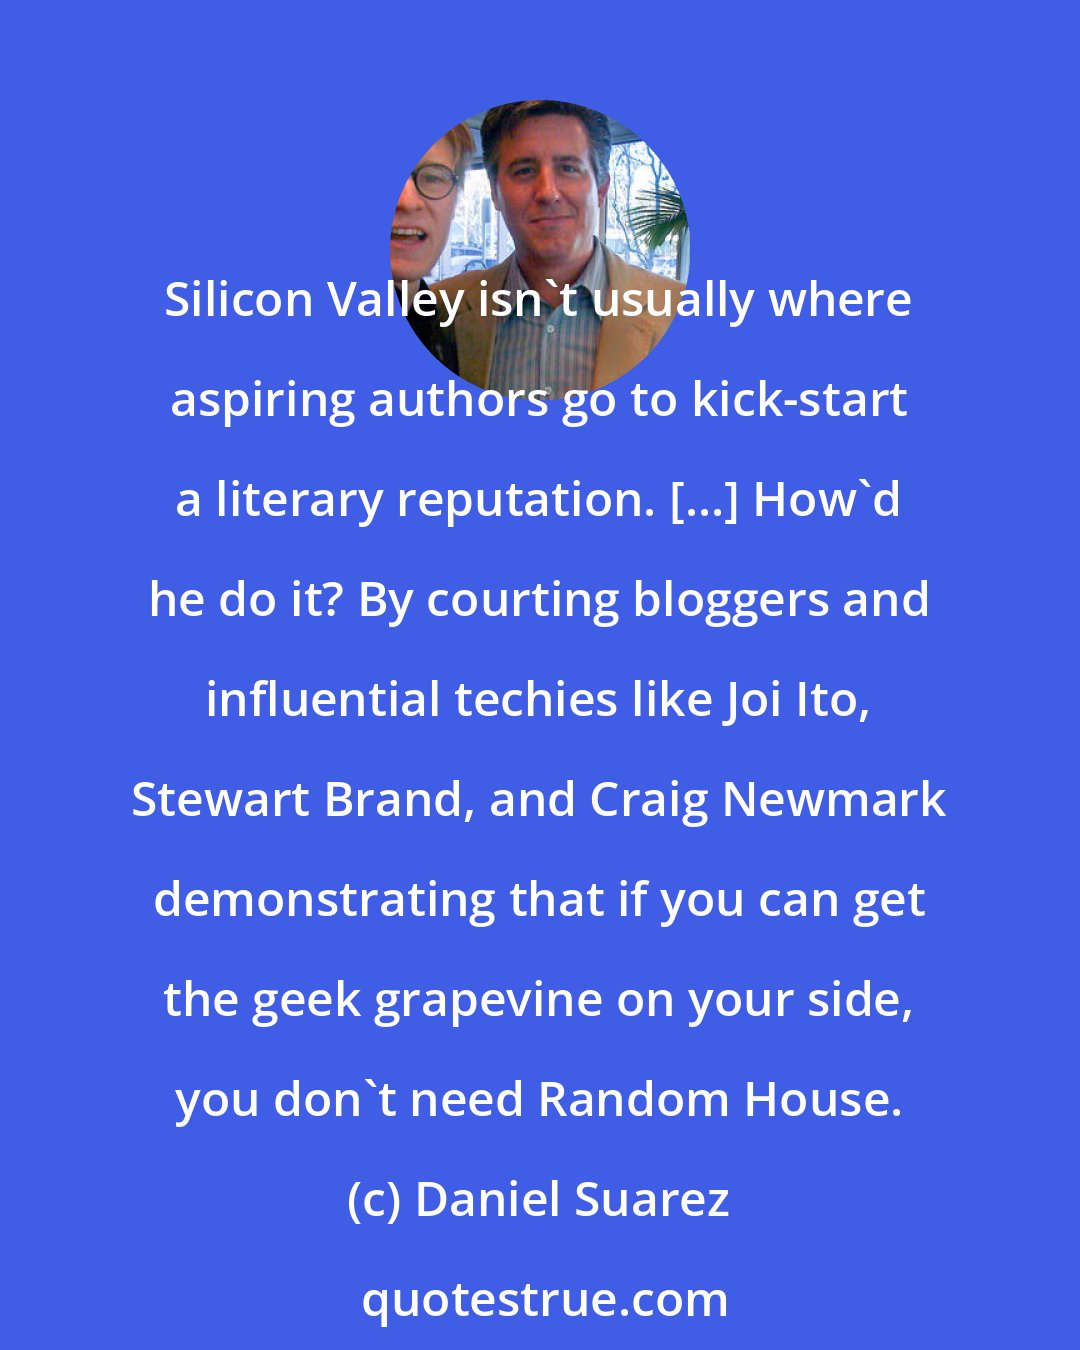 Daniel Suarez: Silicon Valley isn't usually where aspiring authors go to kick-start a literary reputation. [...] How'd he do it? By courting bloggers and influential techies like Joi Ito, Stewart Brand, and Craig Newmark demonstrating that if you can get the geek grapevine on your side, you don't need Random House.